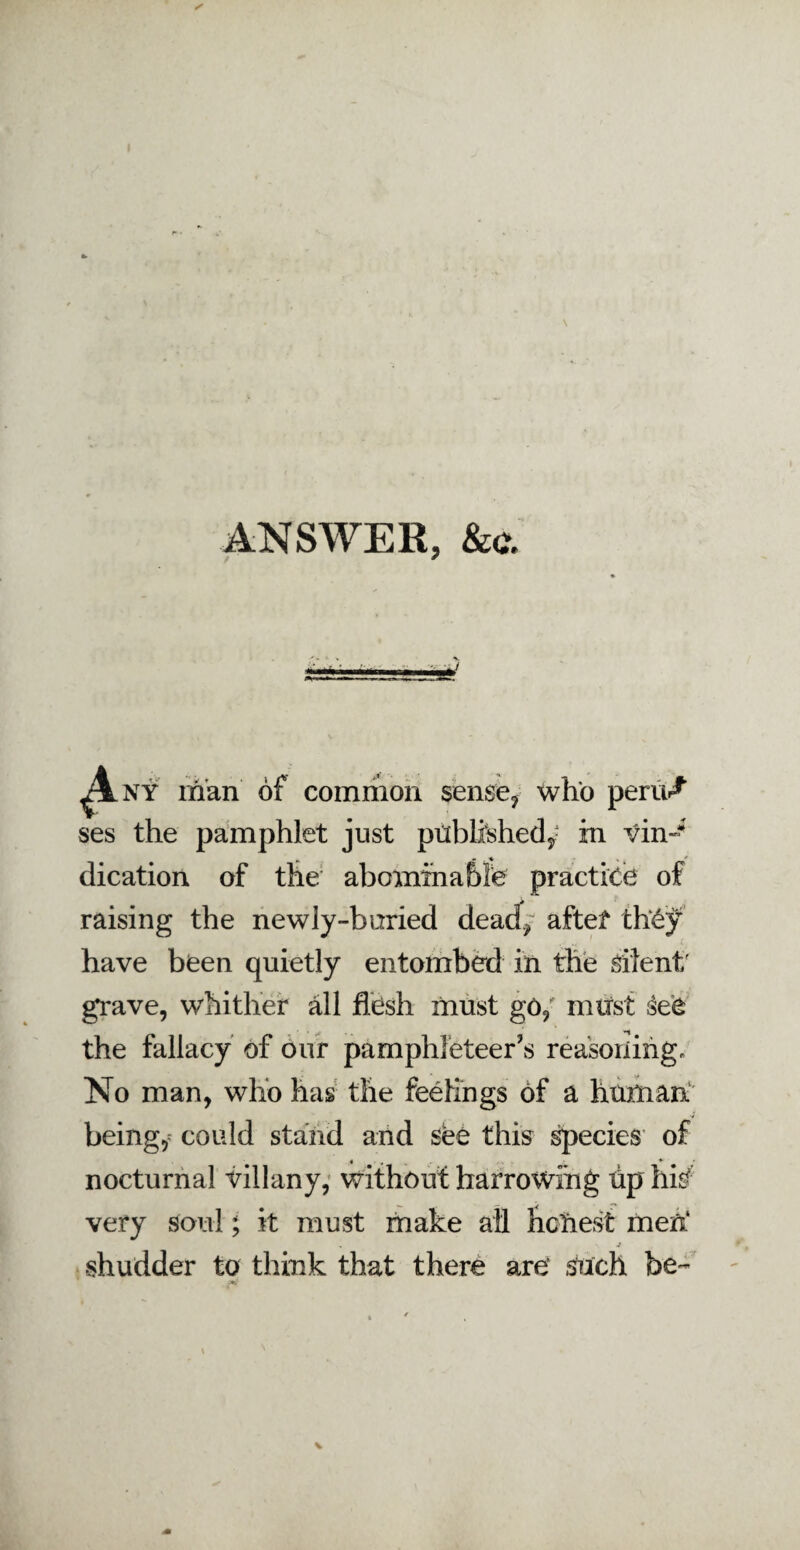 ANSWER, &c. Any man of common sense, who pent/ ses the pamphlet just published,? in vin¬ dication of the abominable practice of raising the newly-buried dead, after th£jf have been quietly entombed in the silent; grave, whither all flesh must go, must see the fallacy of our pamphleteer's reasoning. No man, who has the feelings of a human beings could stand and see this species of « , * nocturnal villany, without harrowing tip hi£ very soul; it must make all honest men* . \ j shudder to think that there are' Such be-